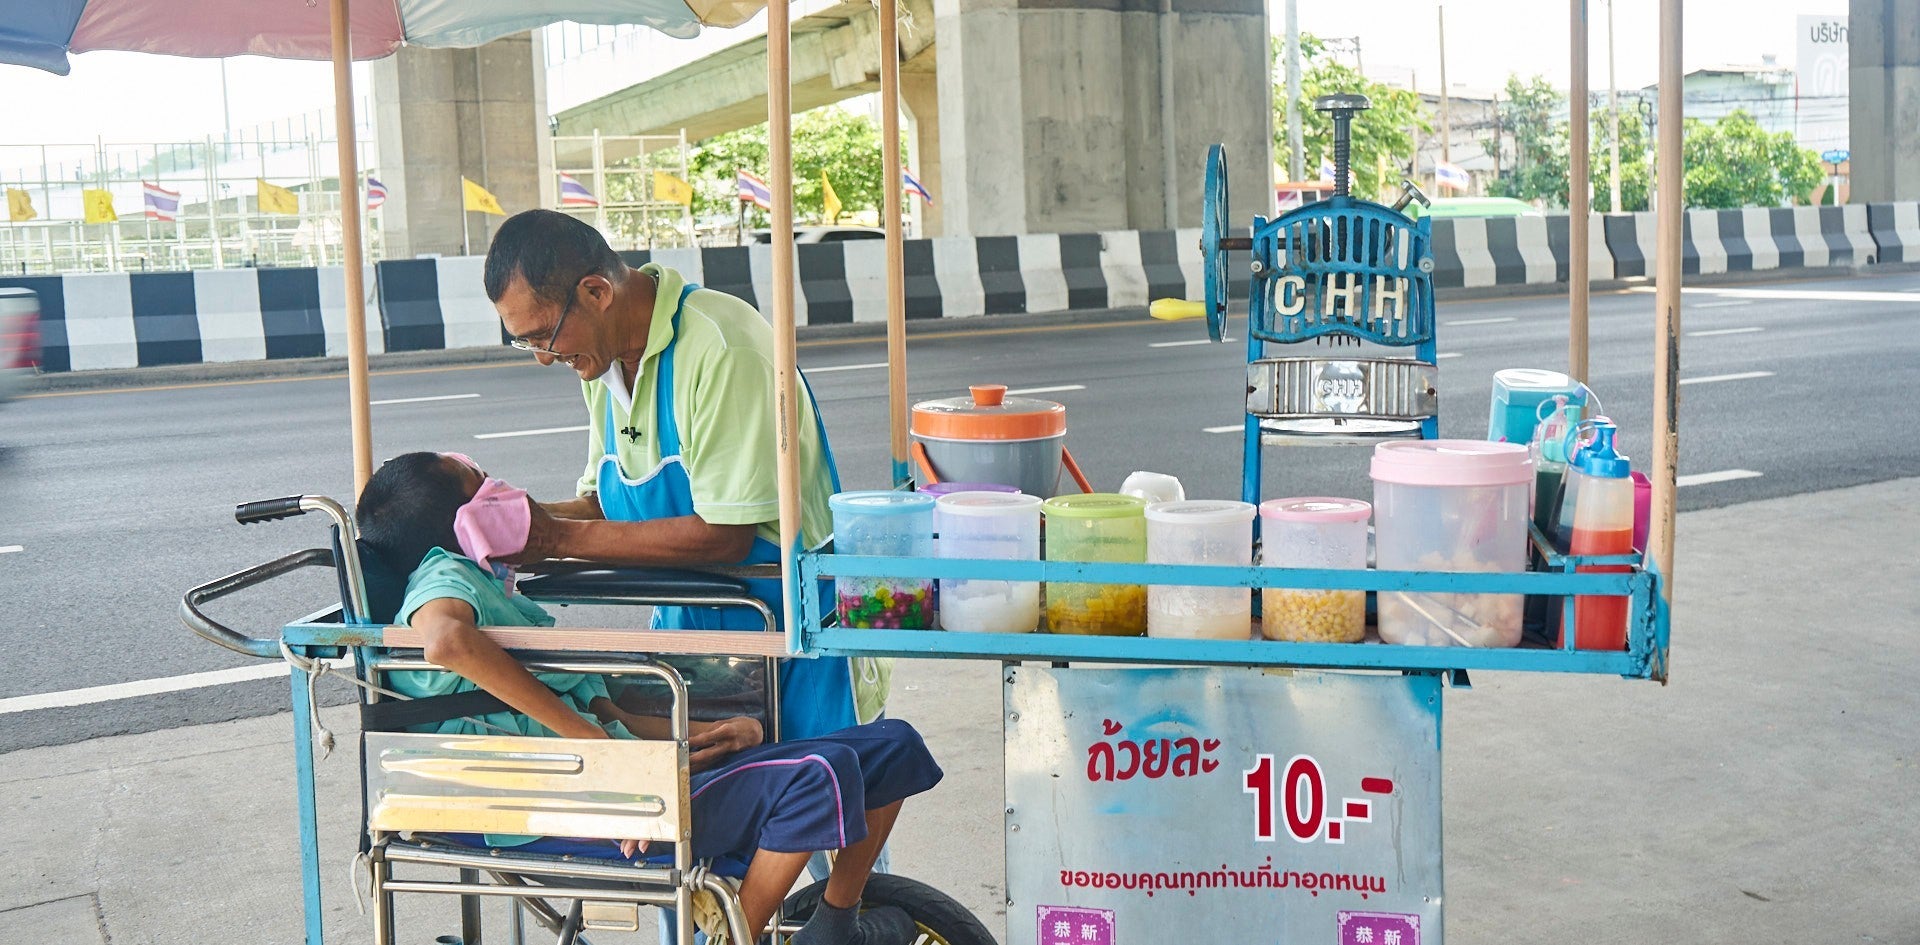 Old Uncle Walks 6km Daily To Sell Shaved Ice For RM1.30 To Care For His Disabled Son - WORLD OF BUZZ 2